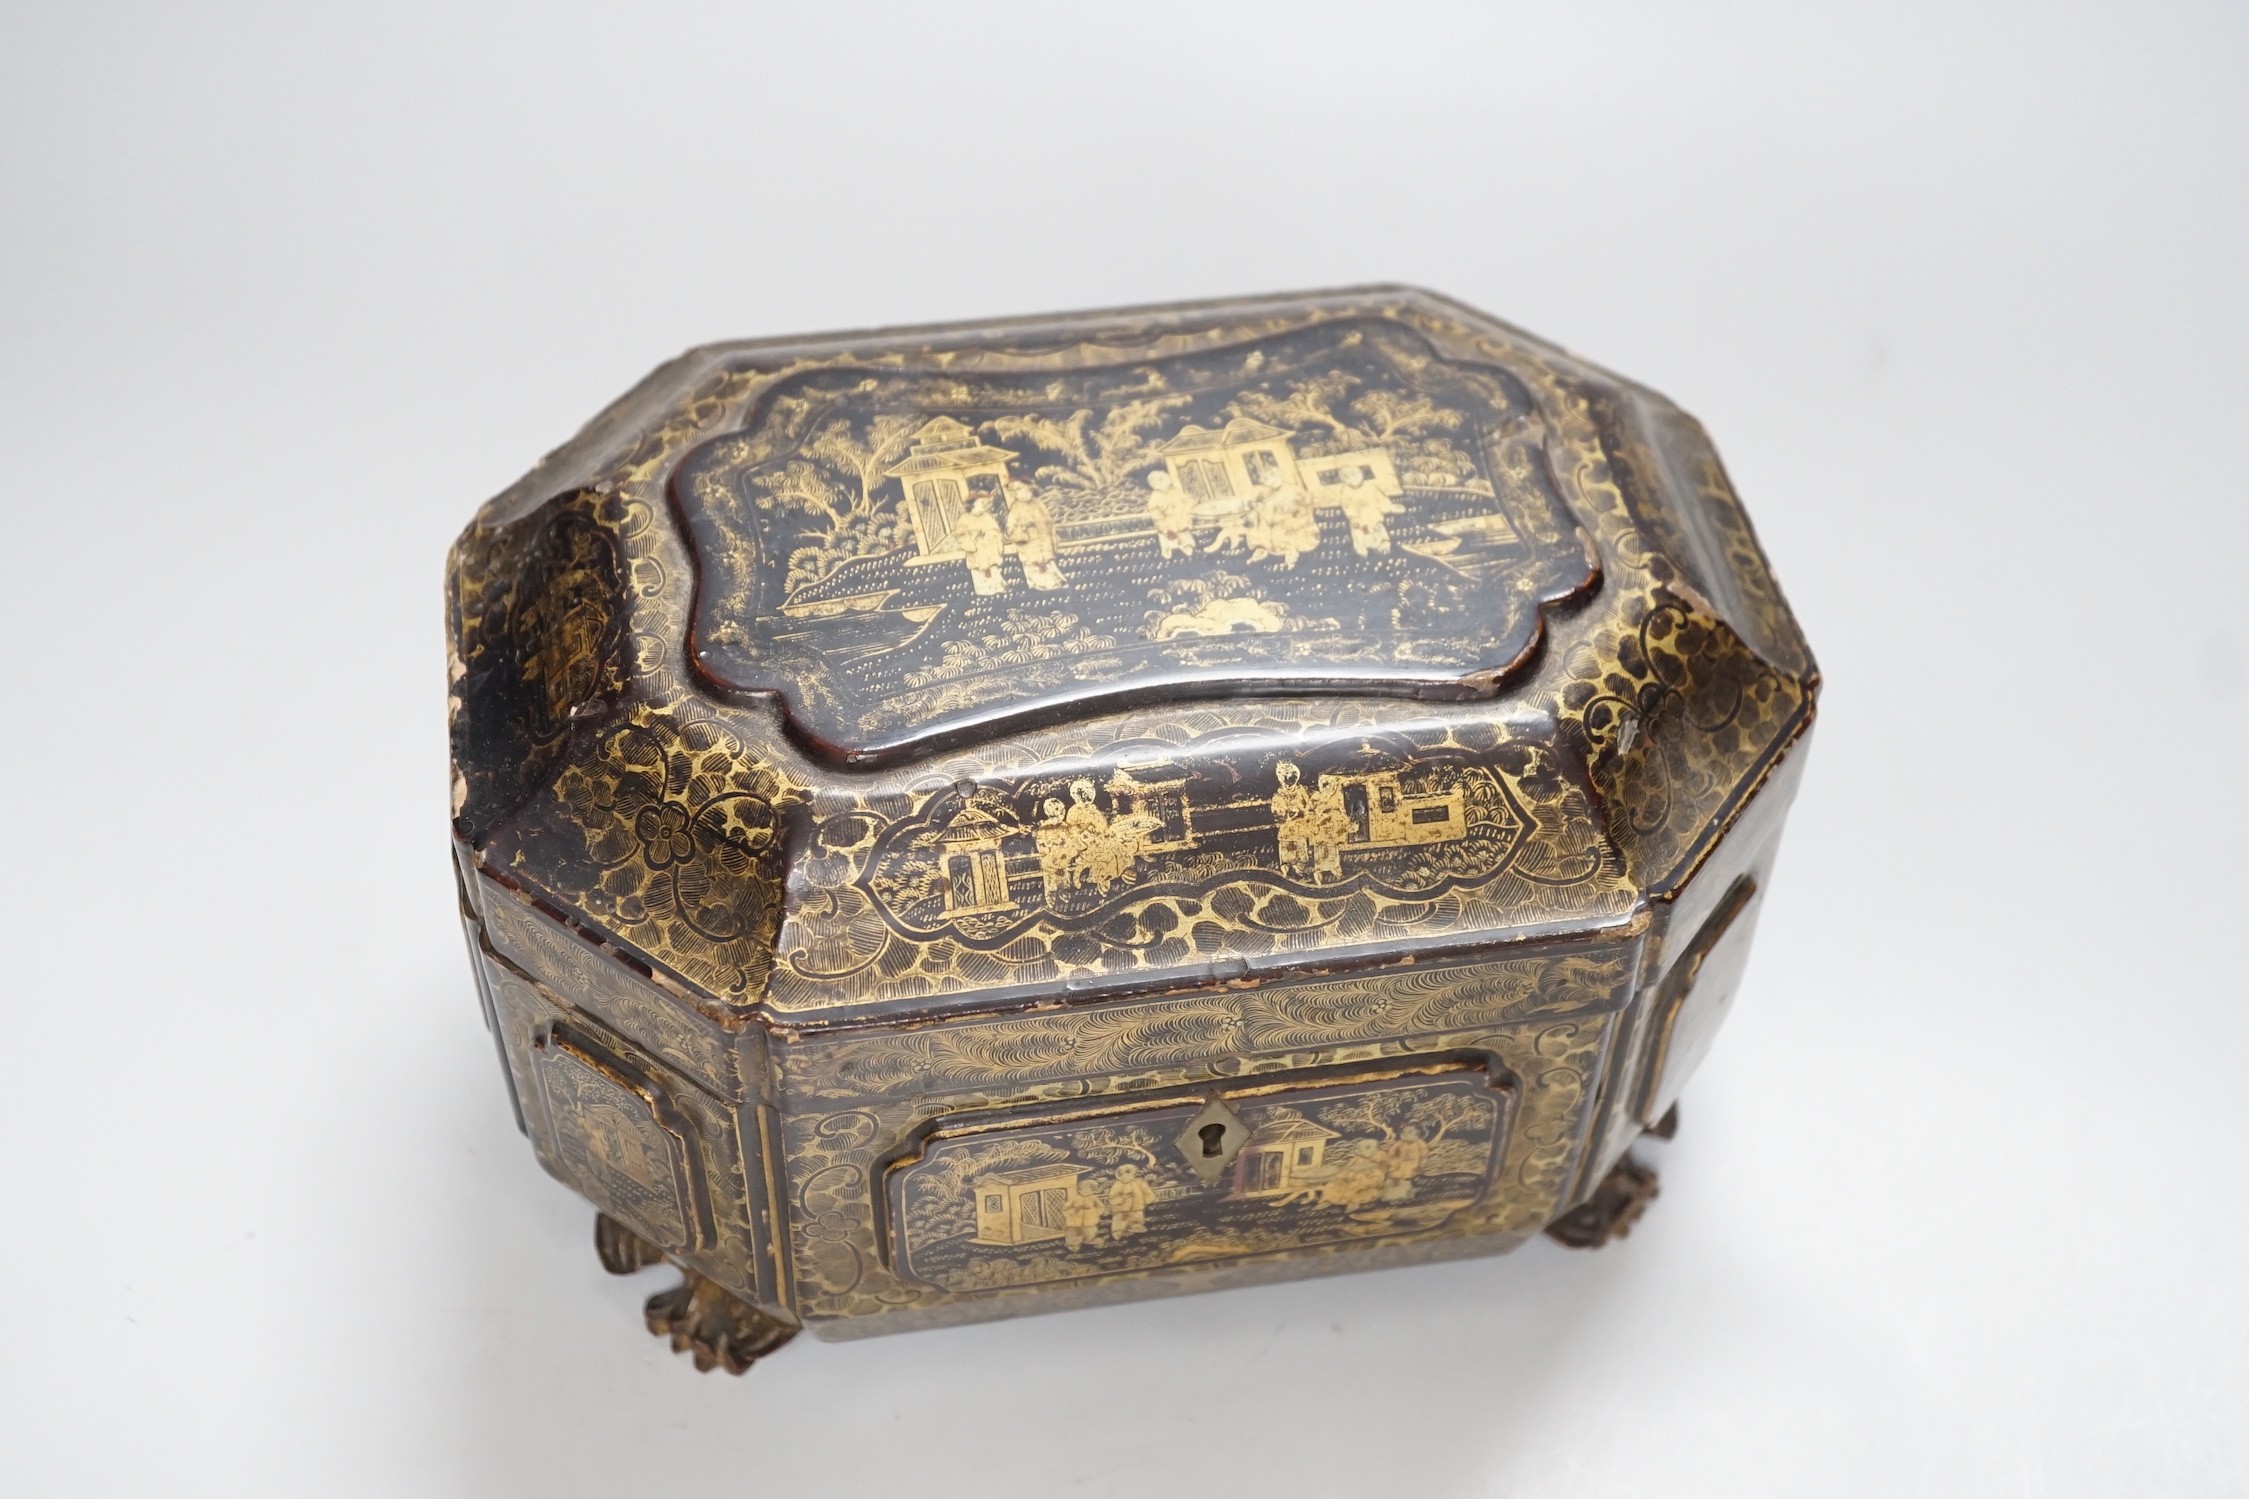 A 19th century Chinese chinoiserie lacquered sarcophagus form tea caddy, pewter lined interior - Image 2 of 6